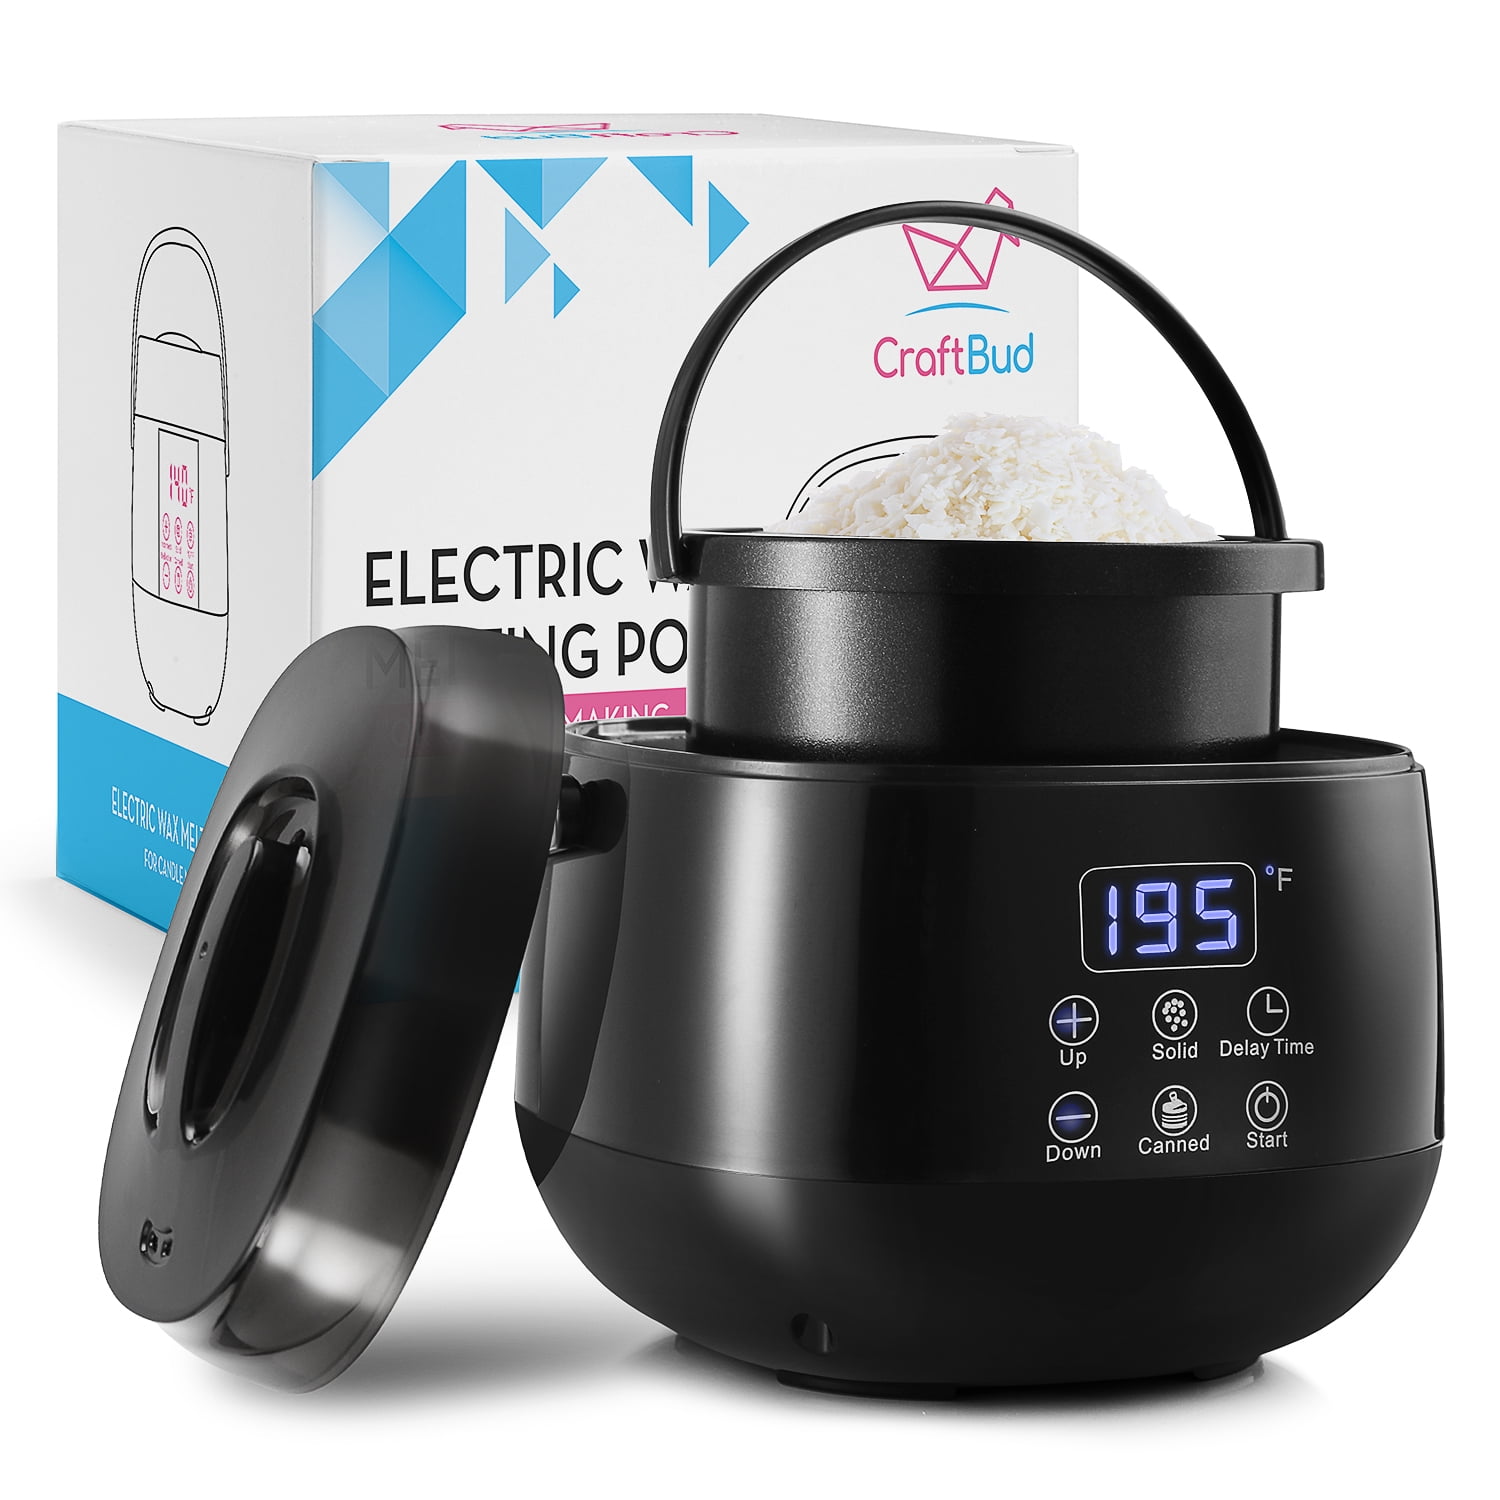 6 Quart Wax Melting Pot with Adjustable Thermostat - Etched Images